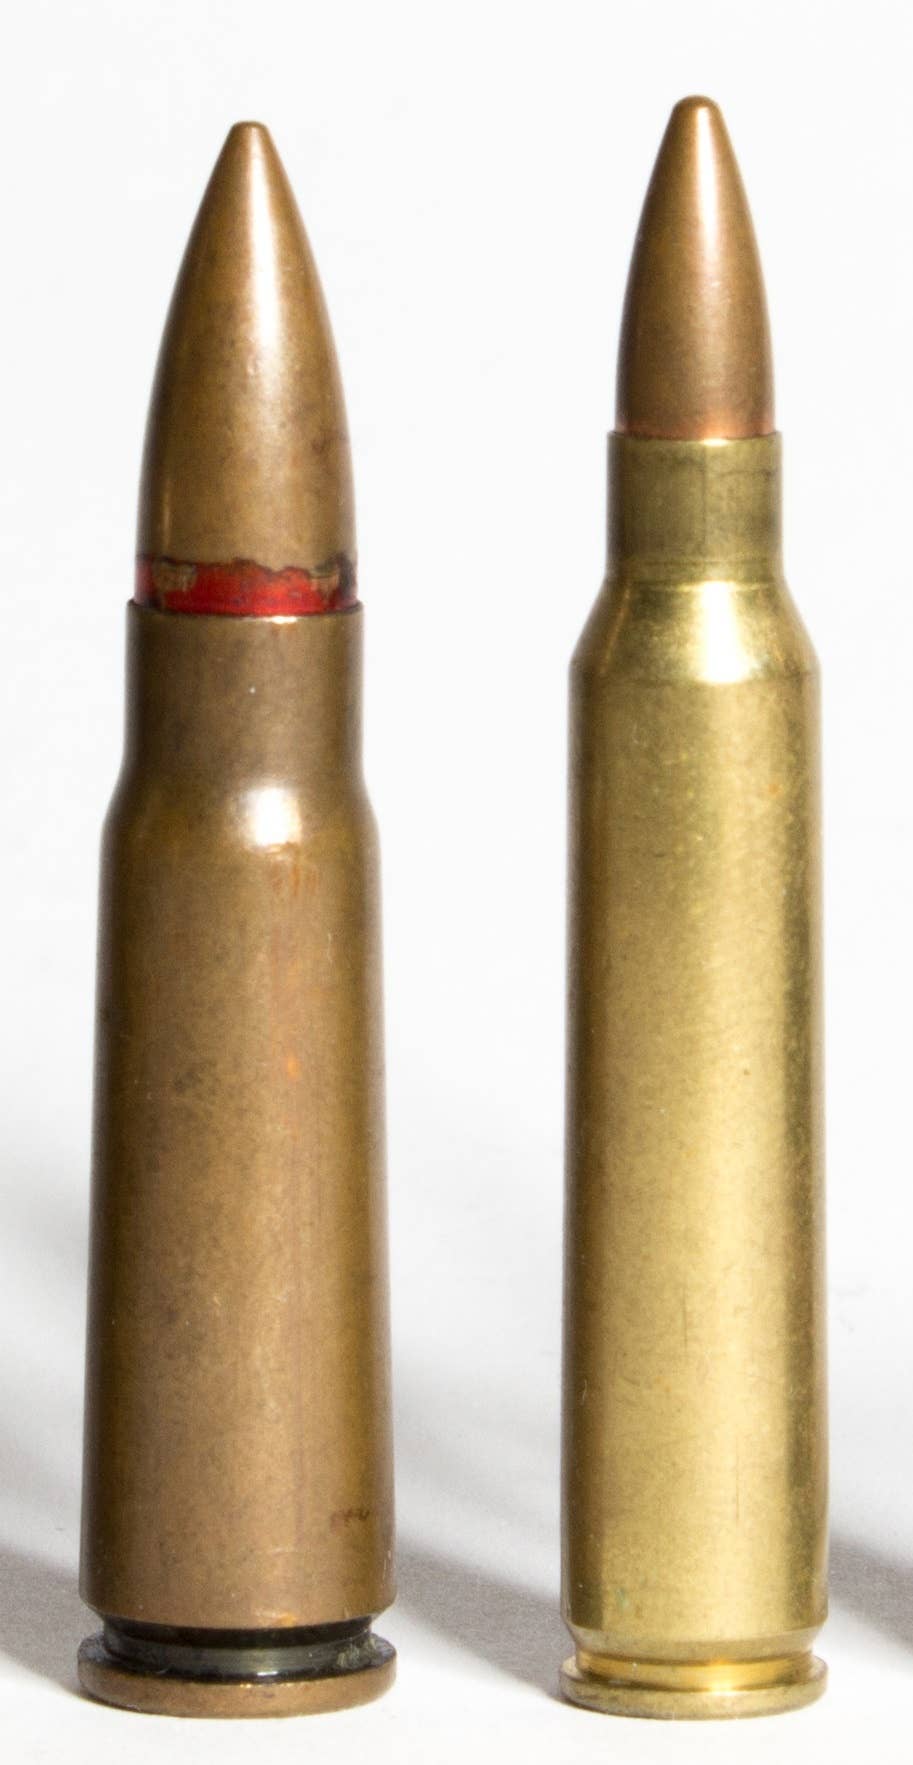 5.56 and 7.62